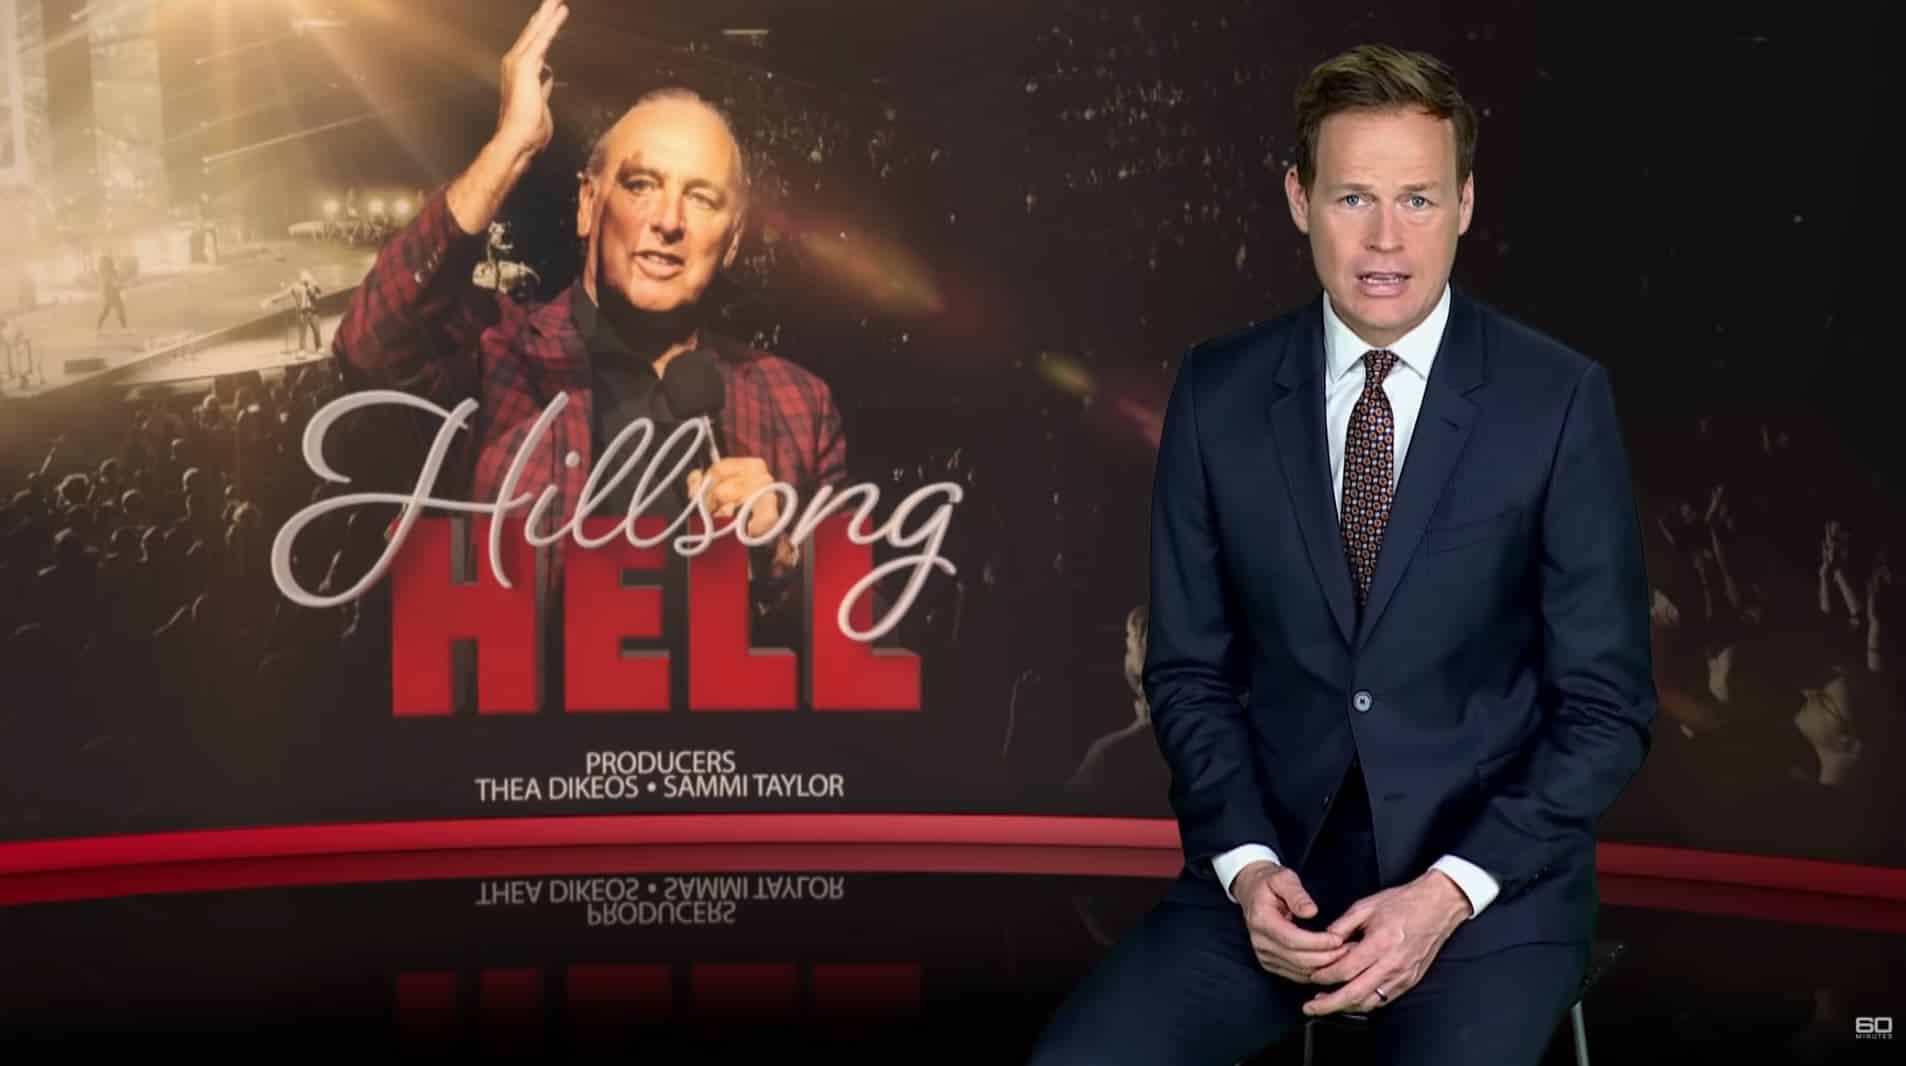 60 Minutes Australia Airs Exposé on Hillsong Church Detailing Abuse Allegations, Celebrity Culture